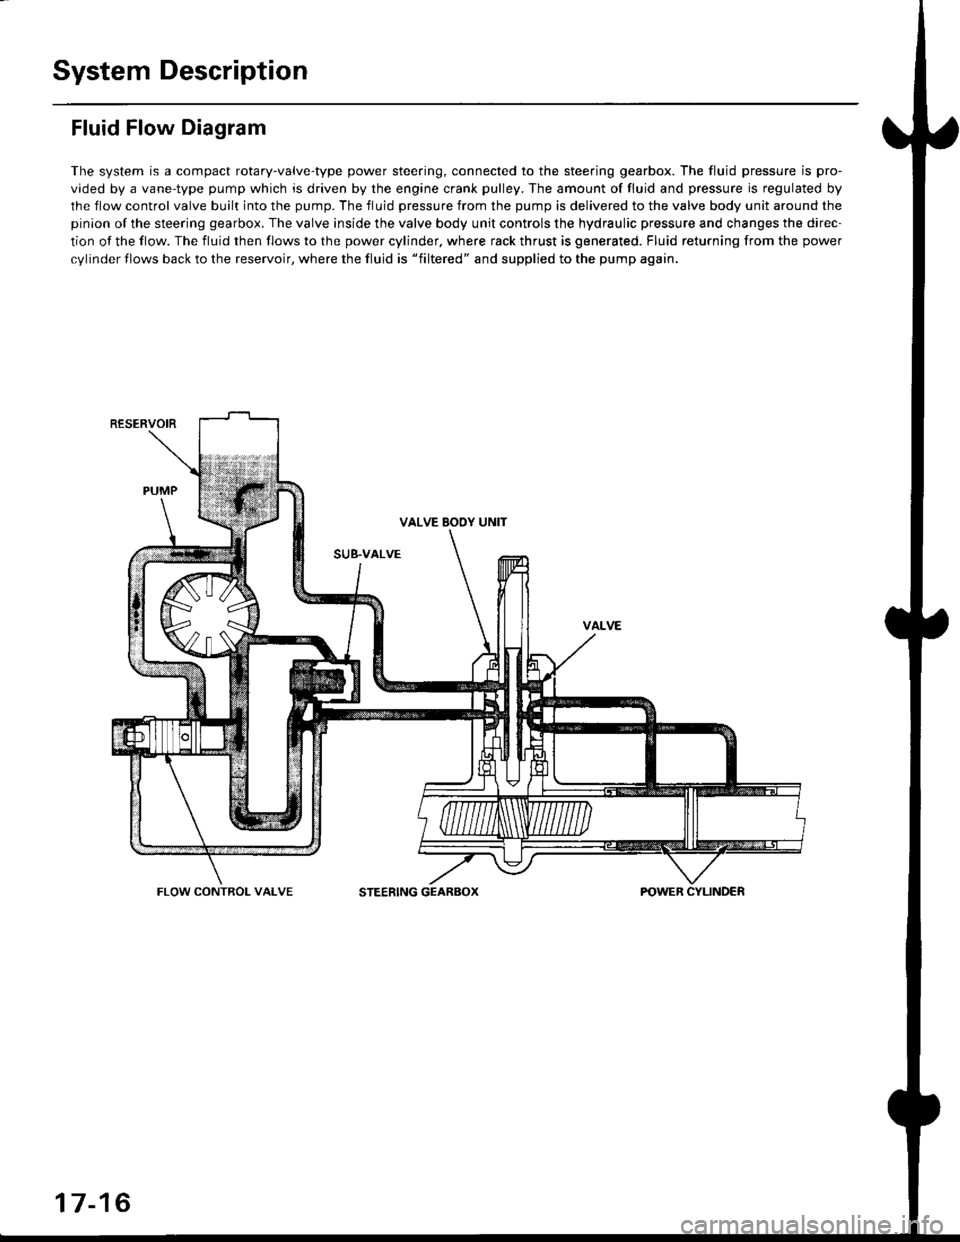 HONDA CIVIC 1999 6.G Workshop Manual System Description
Fluid Flow Diagram
The system is a compact rotary-valve-type power steering, connected to the steering gearbox. The fluid pressure is pro-
vided by a vane-type pump which is driven 